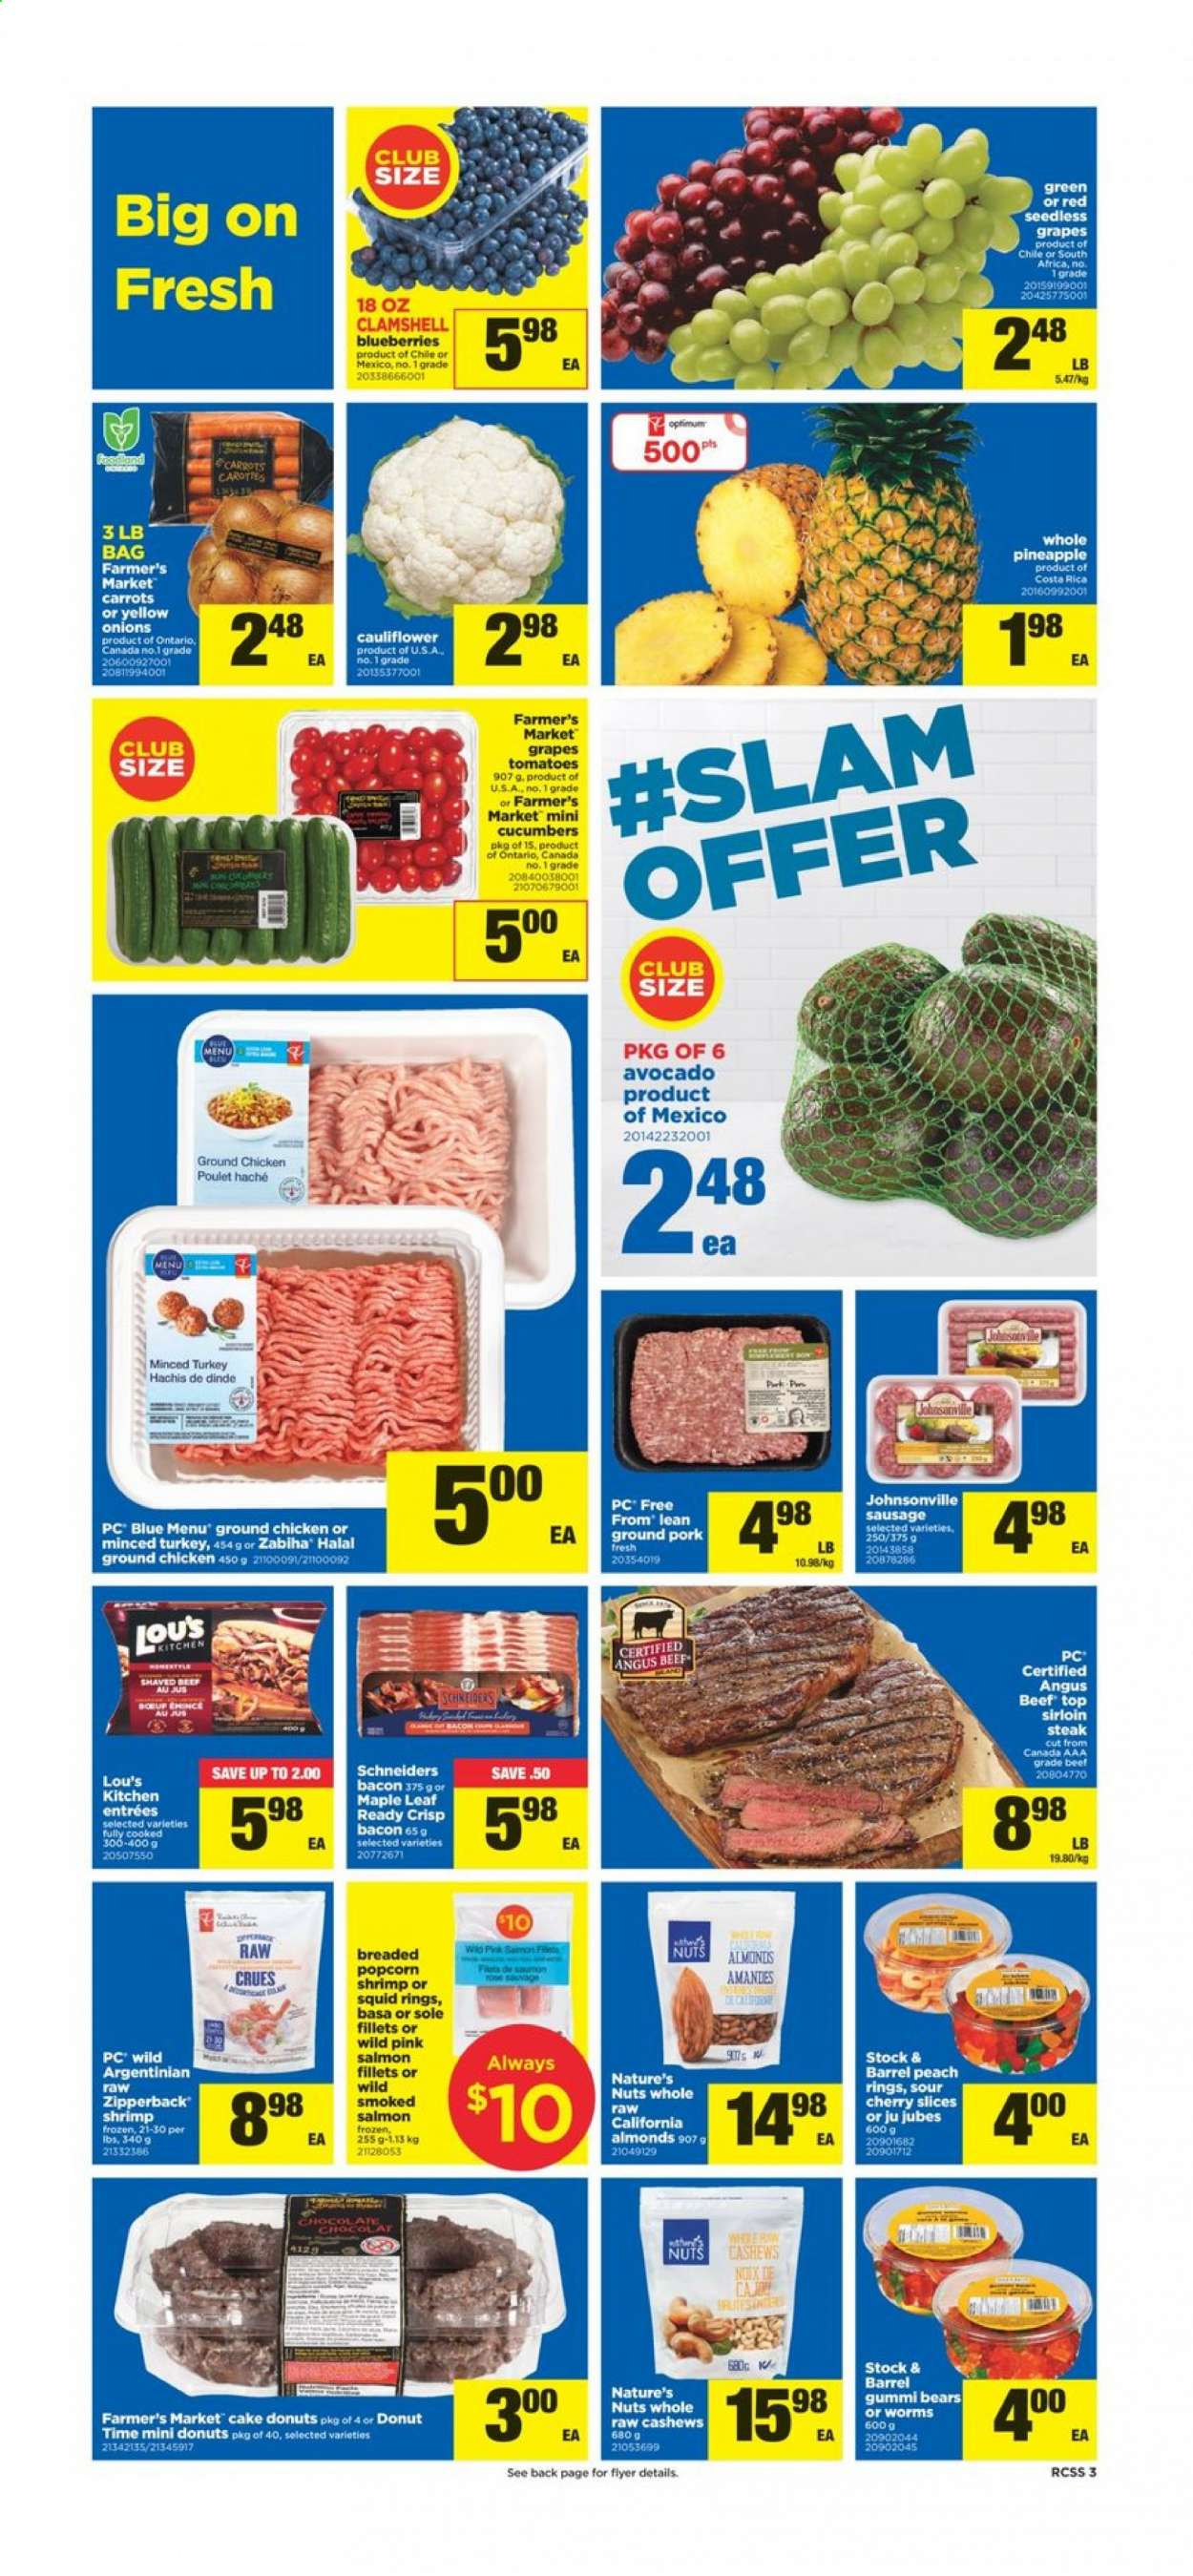 thumbnail - Real Canadian Superstore Flyer - March 04, 2021 - March 10, 2021 - Sales products - cake, donut, carrots, cauliflower, cucumber, tomatoes, onion, avocado, blueberries, grapes, seedless grapes, pineapple, cherries, salmon, salmon fillet, smoked salmon, squid, shrimps, squid rings, bacon, Johnsonville, sausage, chocolate, almonds, cashews, ground chicken, chicken, beef meat, beef sirloin, sirloin steak, ground pork, steak. Page 3.